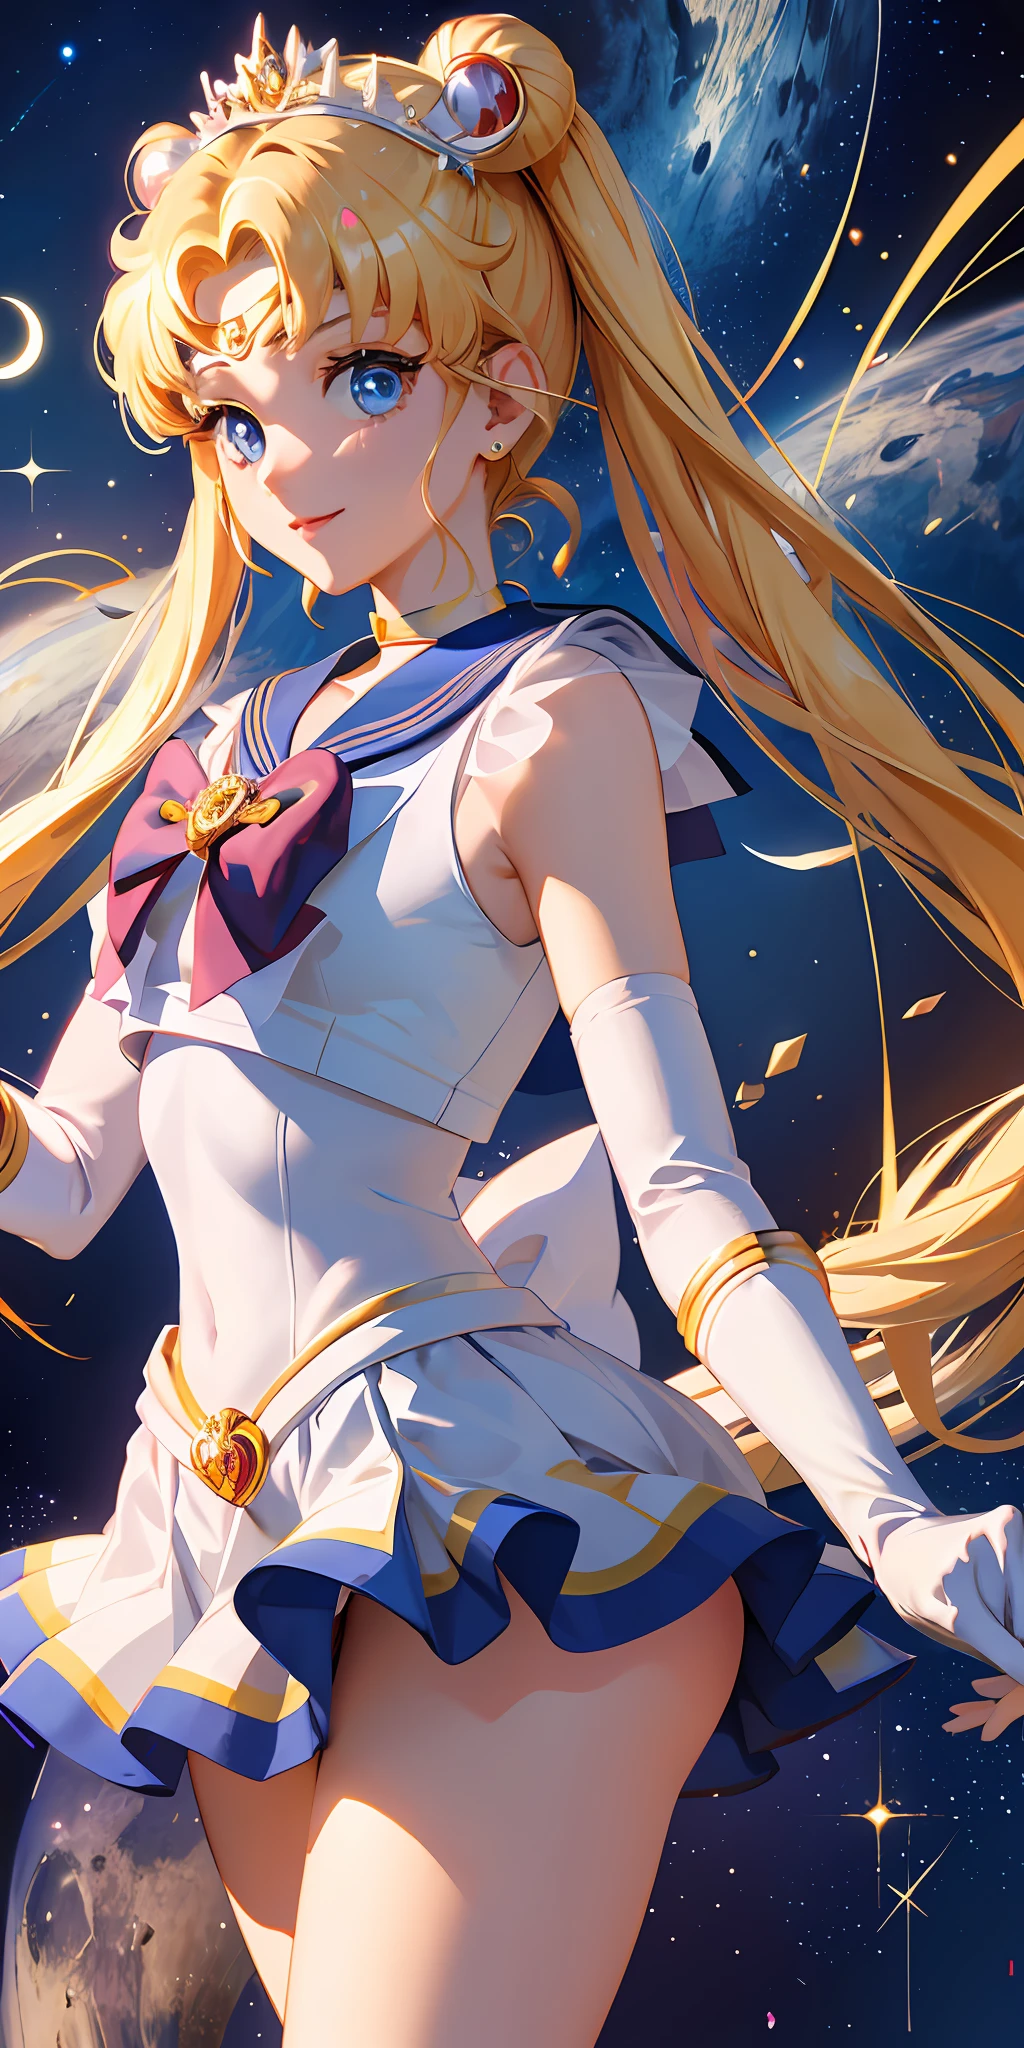 Masterpiece, Best Quality, Hi-Res, Moon 1, 1 Girl, Solo, Sailor Senshi Uniform, Sailor Moon, Usagi Tsukino, Blonde, Magical Girl, Blue Eyes, White Panties, Red Scarf, Elbow Gloves, Tiara, Blue Skirt, Pleated Skirt, Mini Skirt, Choker, White Gloves, Jewelry, Earrings, Smile, Background Is Space (Excellent Detail, Excellent Lighting, Wide Angle), skirt lift, show panties,